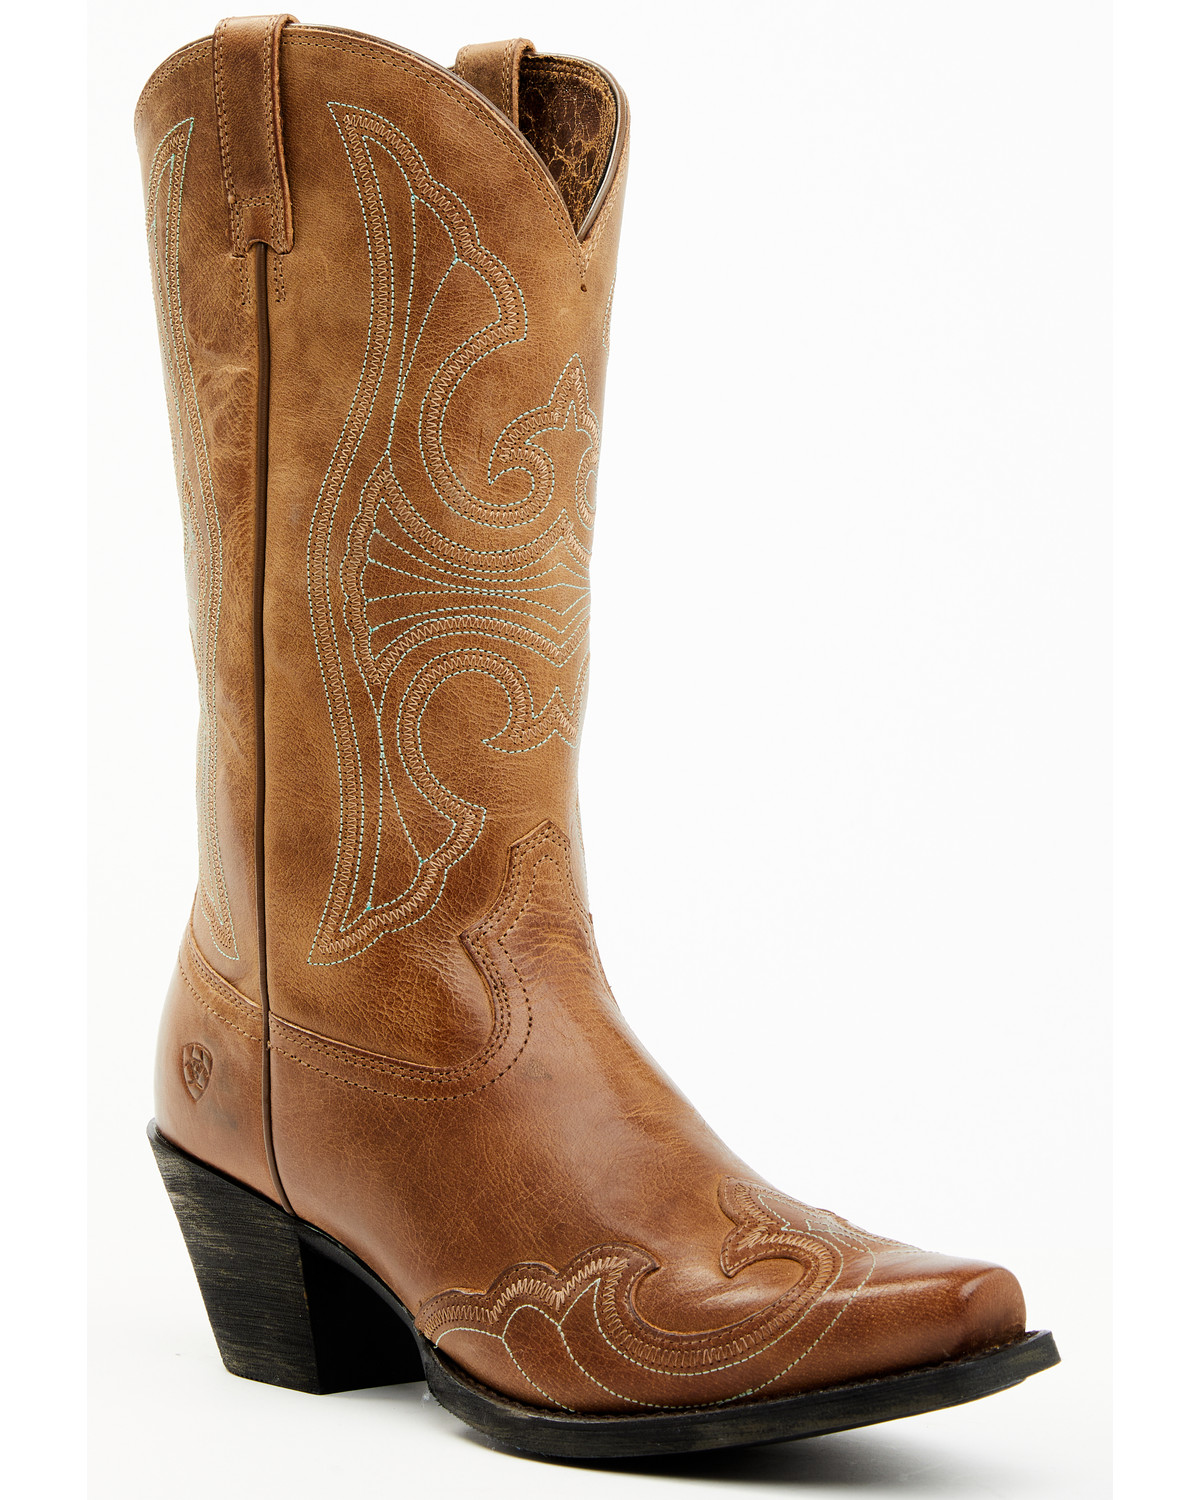 Ariat Round Up Sandstorm Cowgirl Boots - Snip Toe | Sheplers